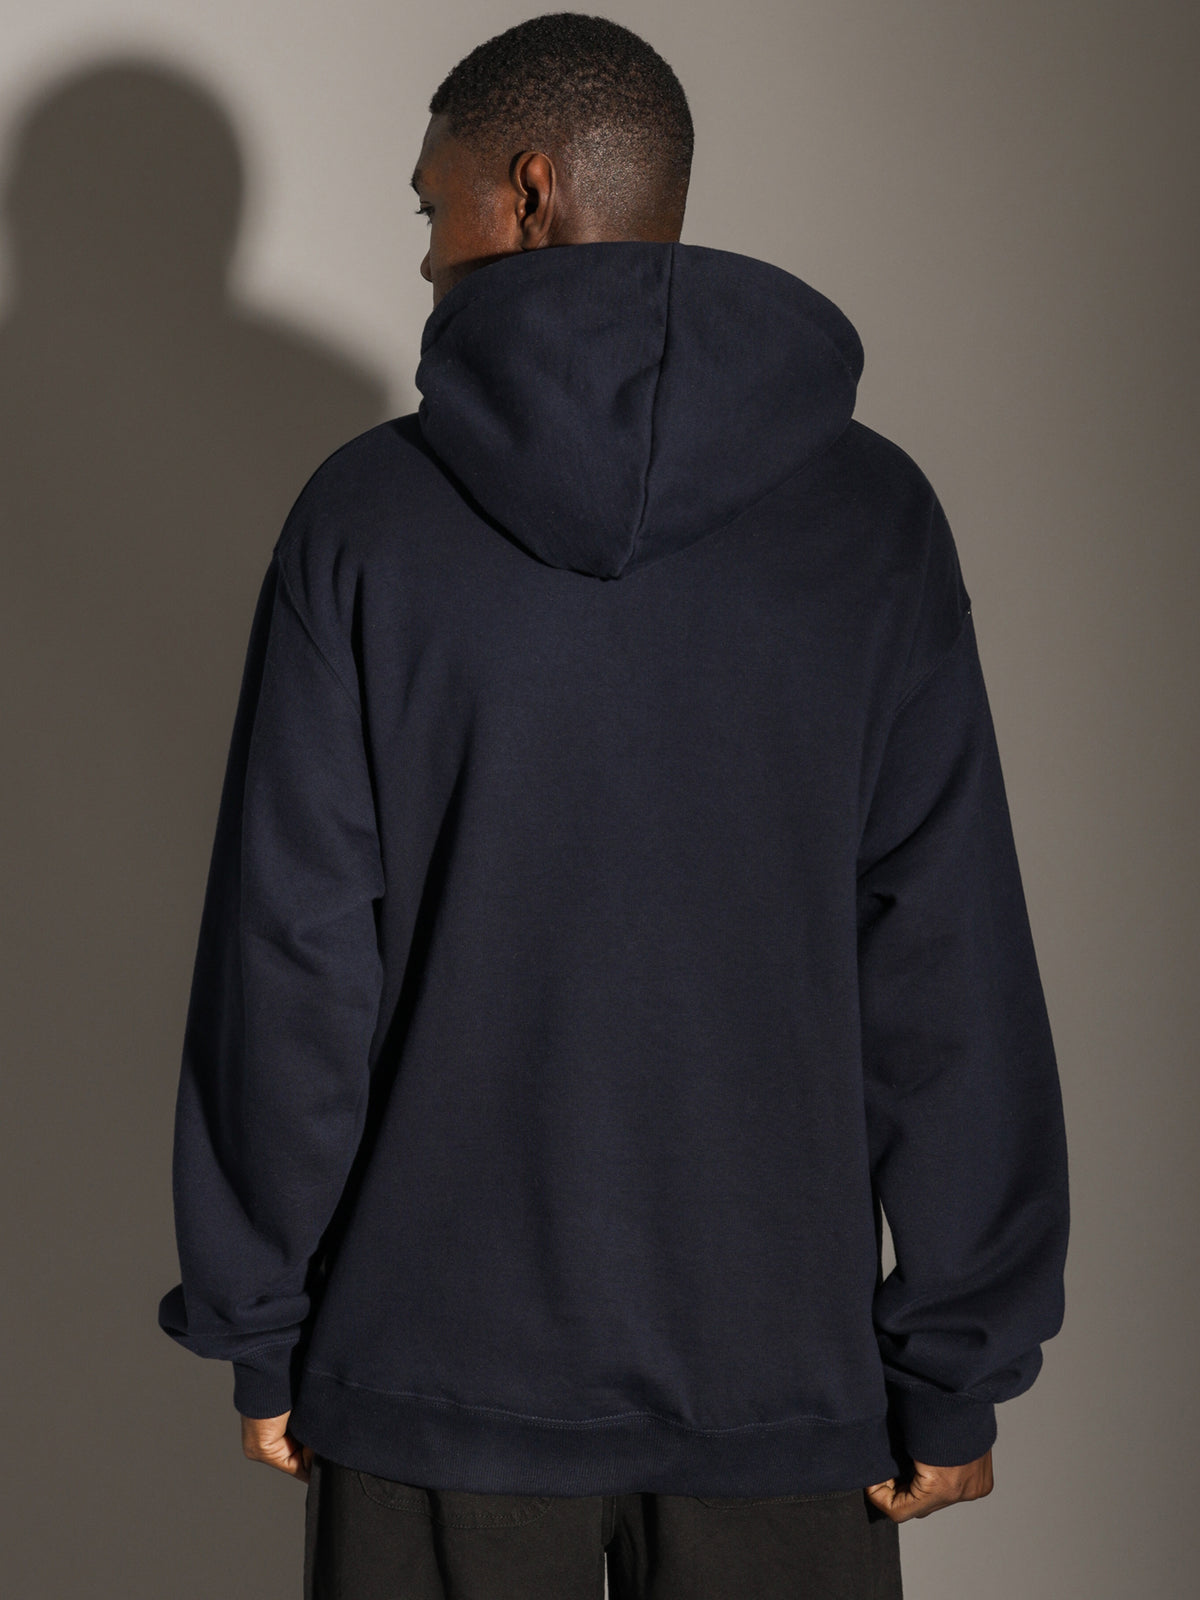 Conference Hood in Navy Blue